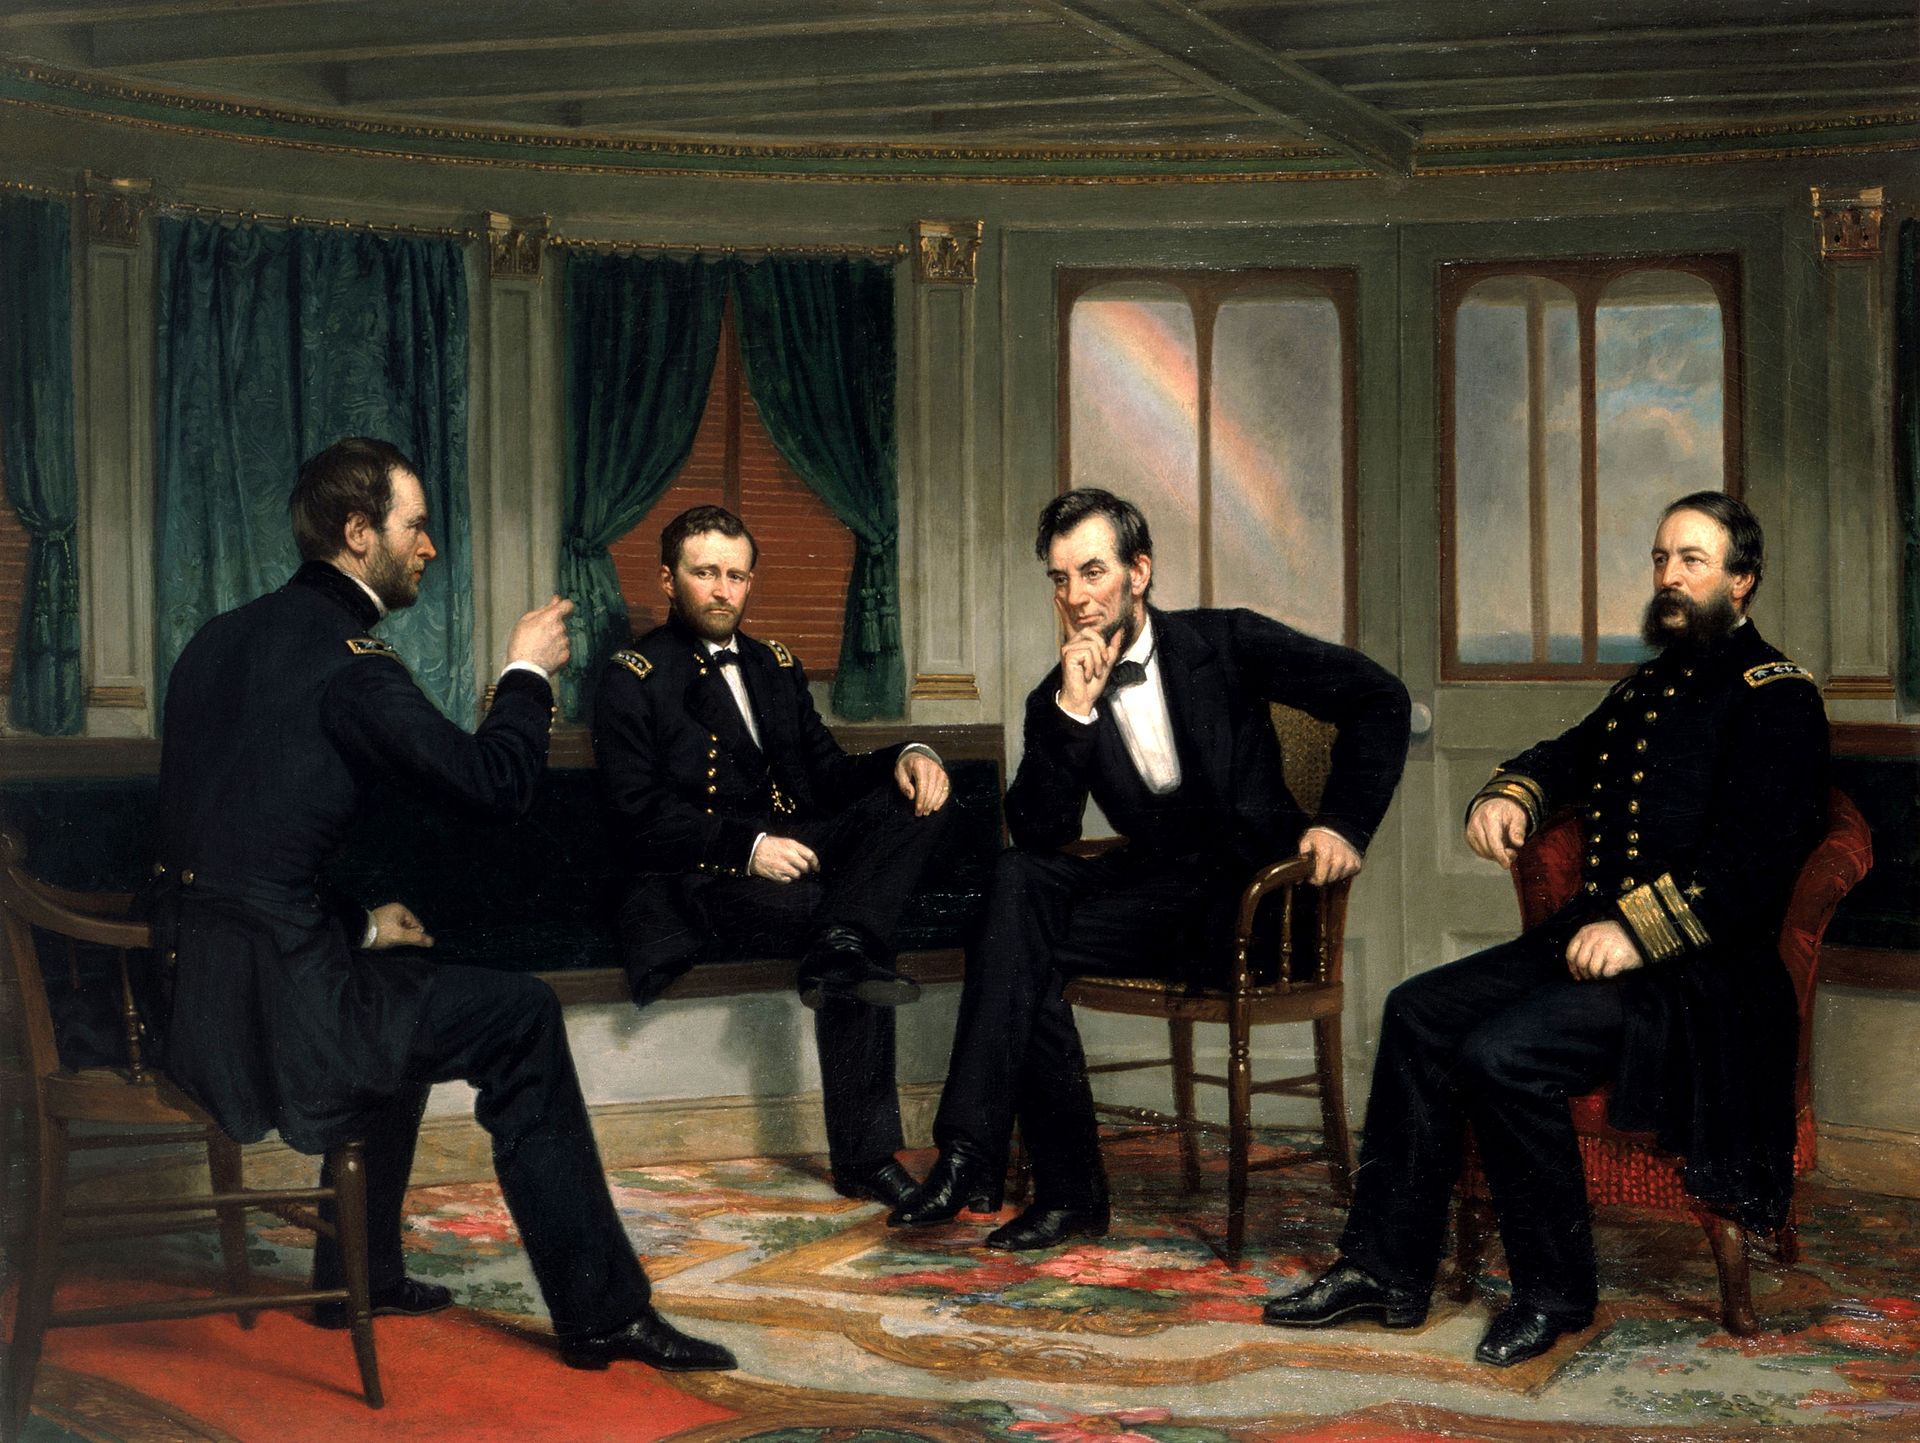 Lincoln’s War for ‘Hearts and Minds’ — The President’s Strategy for Preserving the Union Went Far Beyond the Battlefield